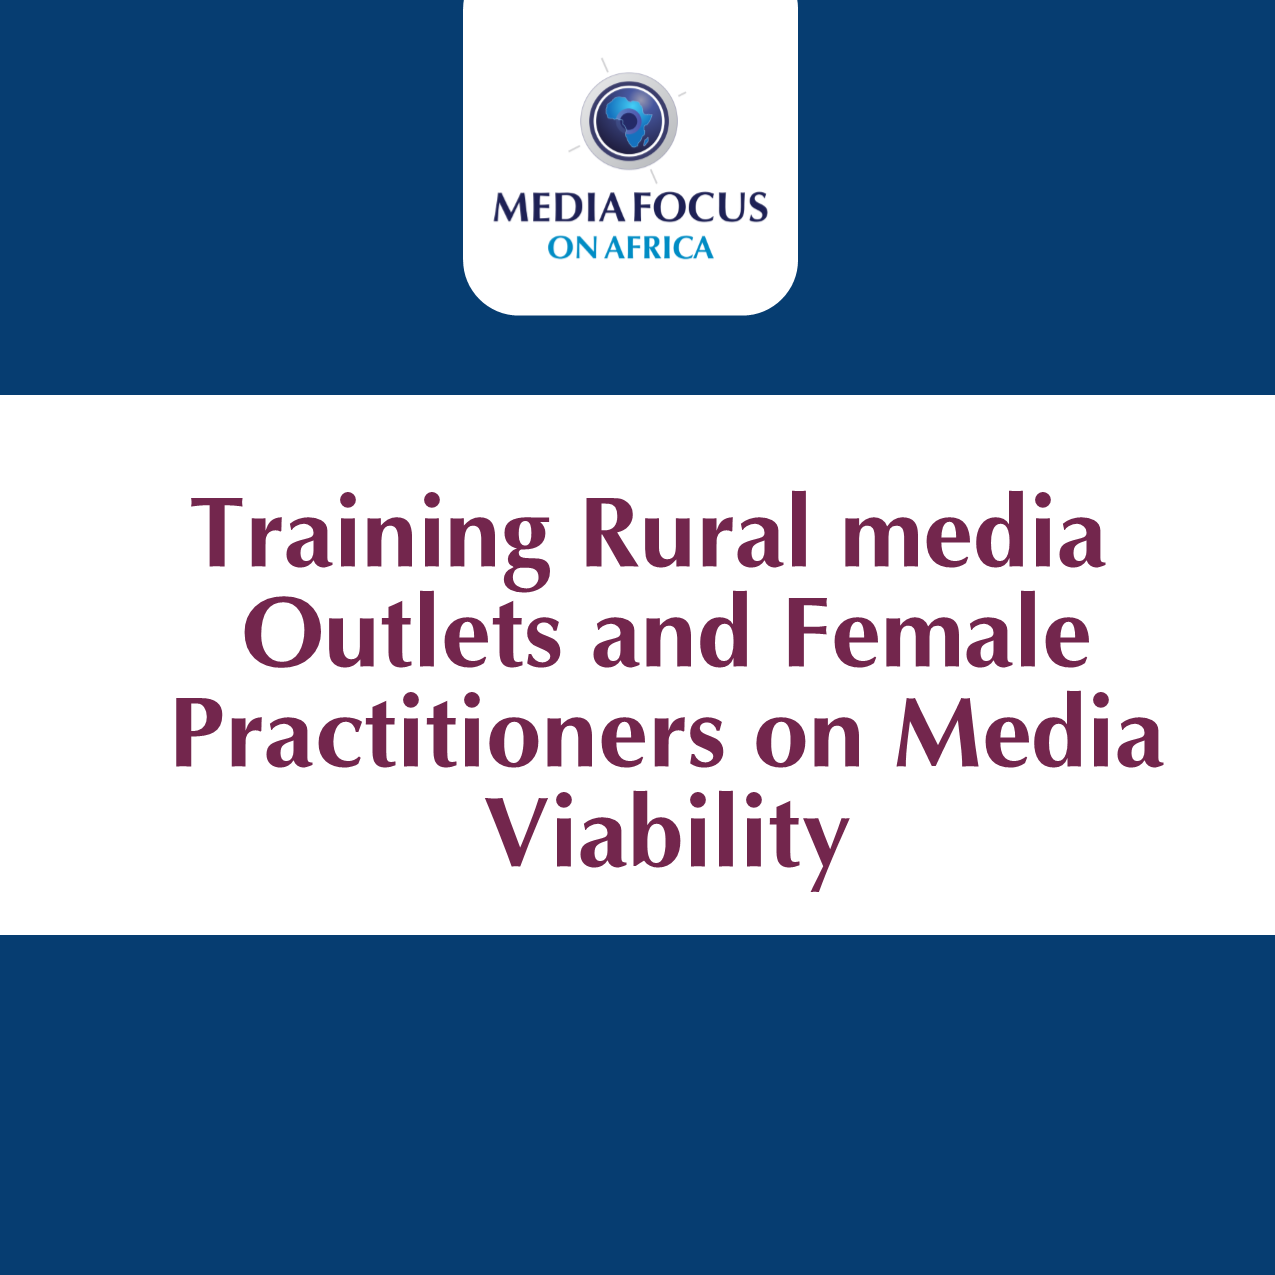 Training Rural media Outlets and Female Practitioners on Media Viability